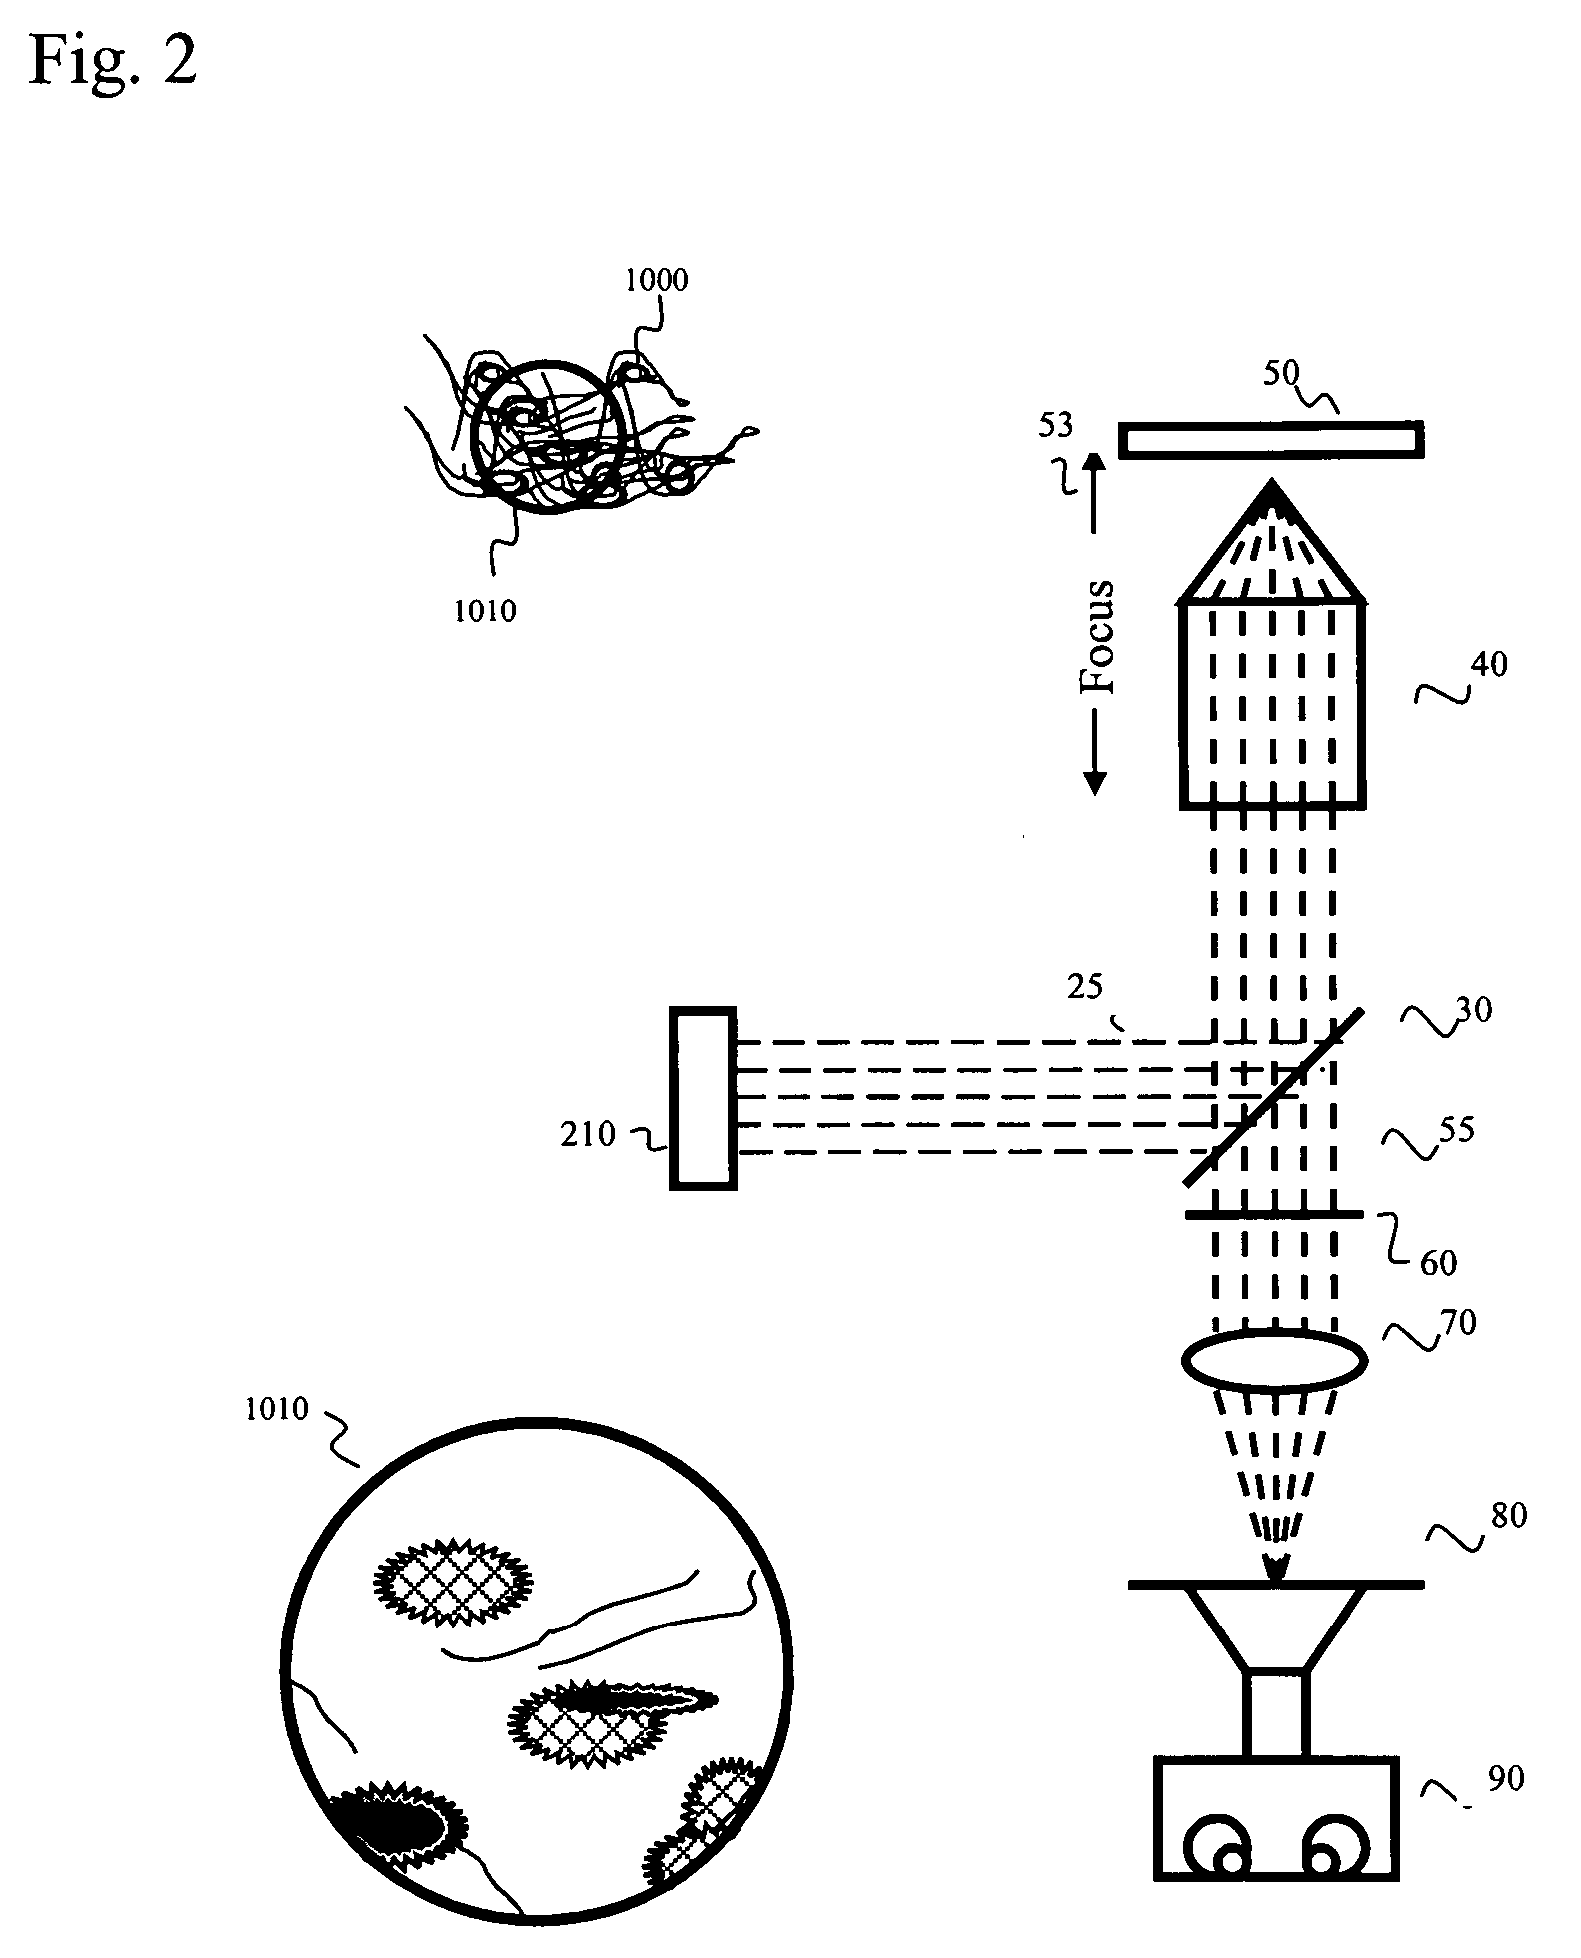 Method and system for wide-field multi-photon microscopy having a confocal excitation plane